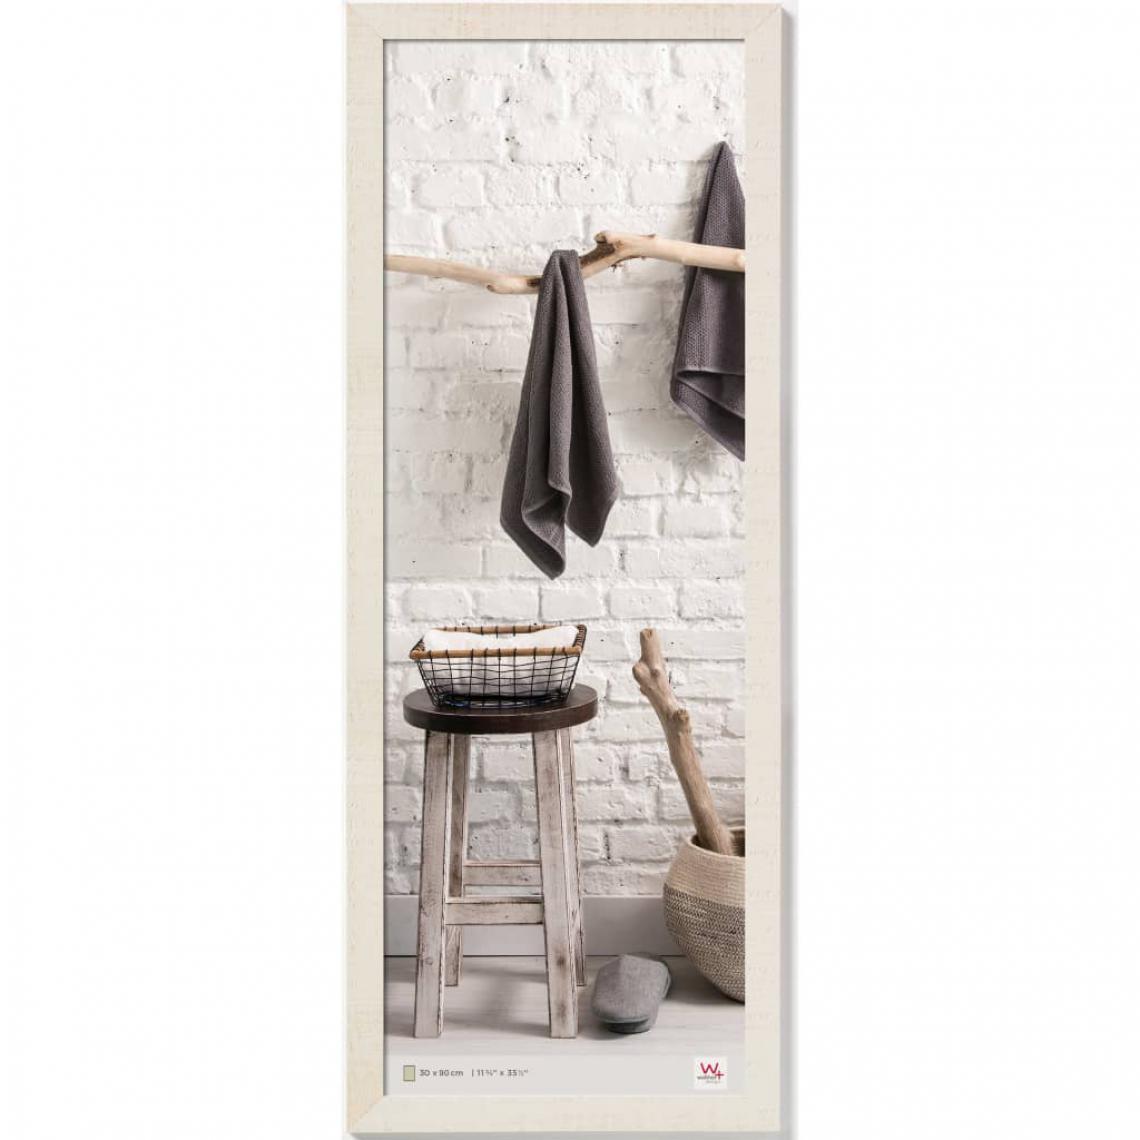 Walther - Walther Design Cadre photo Home 30x90 cm Blanc - Cadres, pêle-mêle